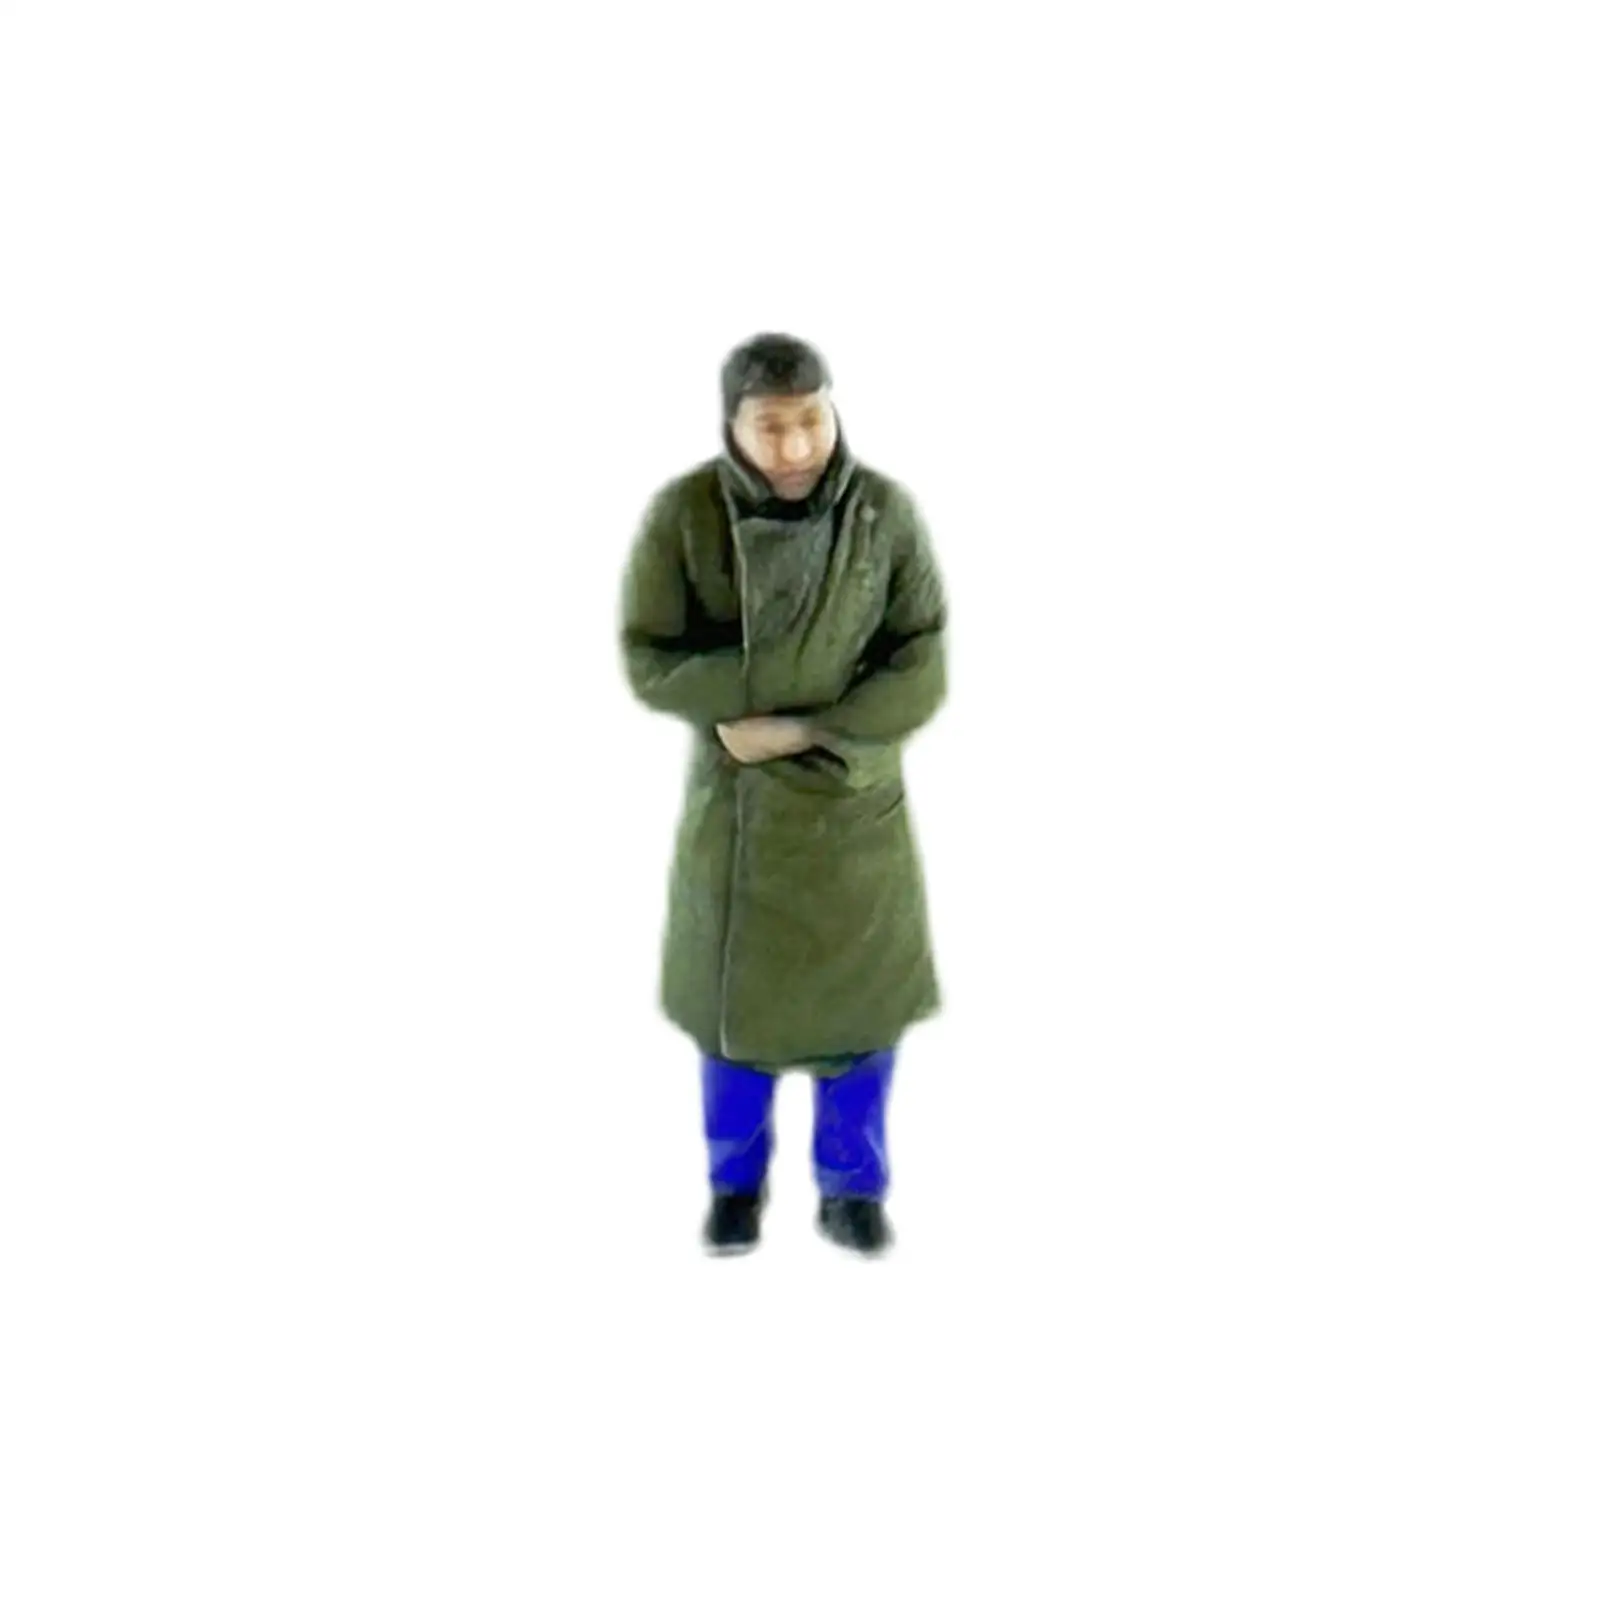 1:64 Wearing Green Coat Figures Model Trains People Figures Diorama Action Figurines for Miniature Scene Dollhouse Accessories